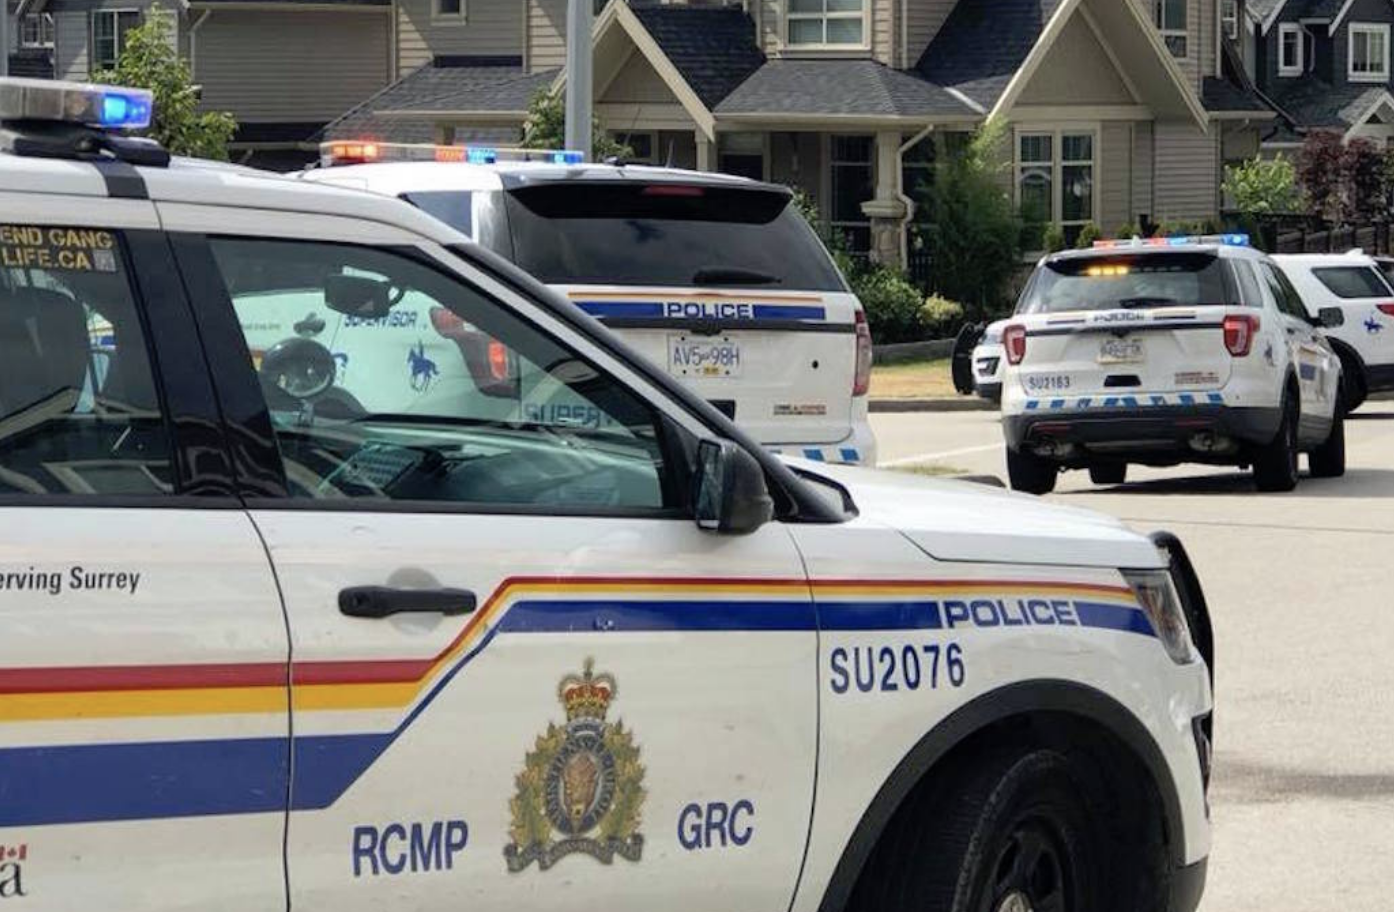 Shots fired at a residence in Surrey